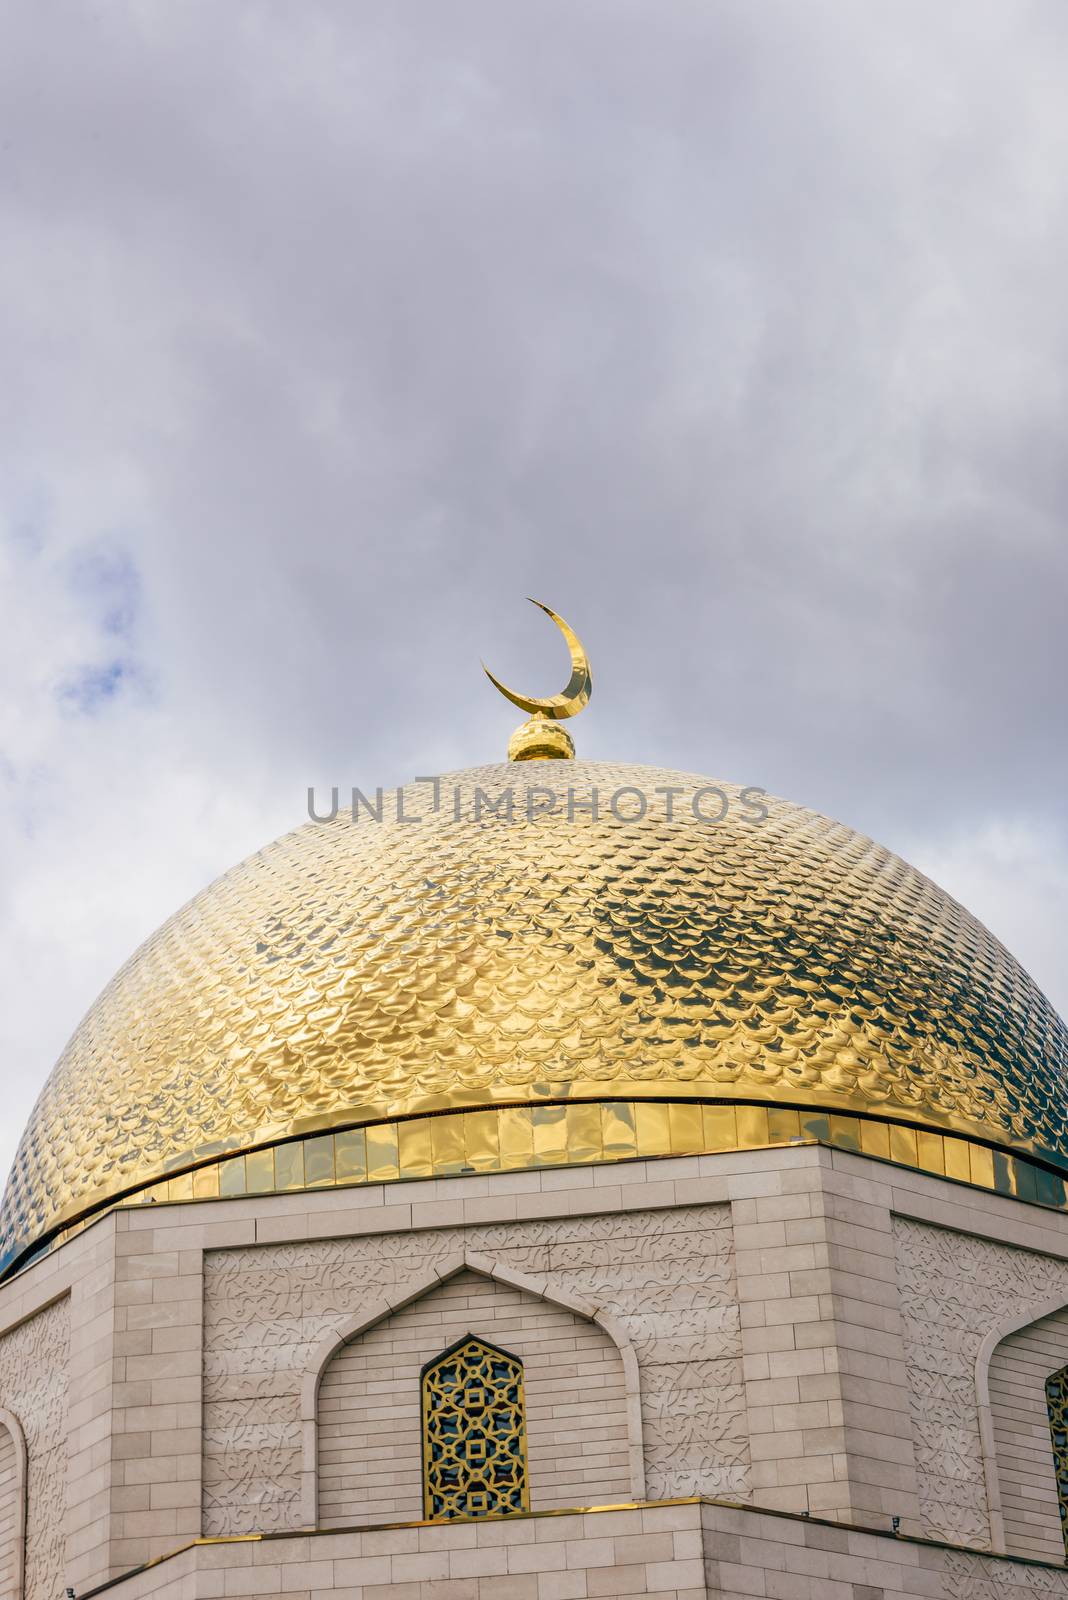 The Memorial Sign Dedicated to Adoption of Islam by Bulgars in 922. Golden Dome.